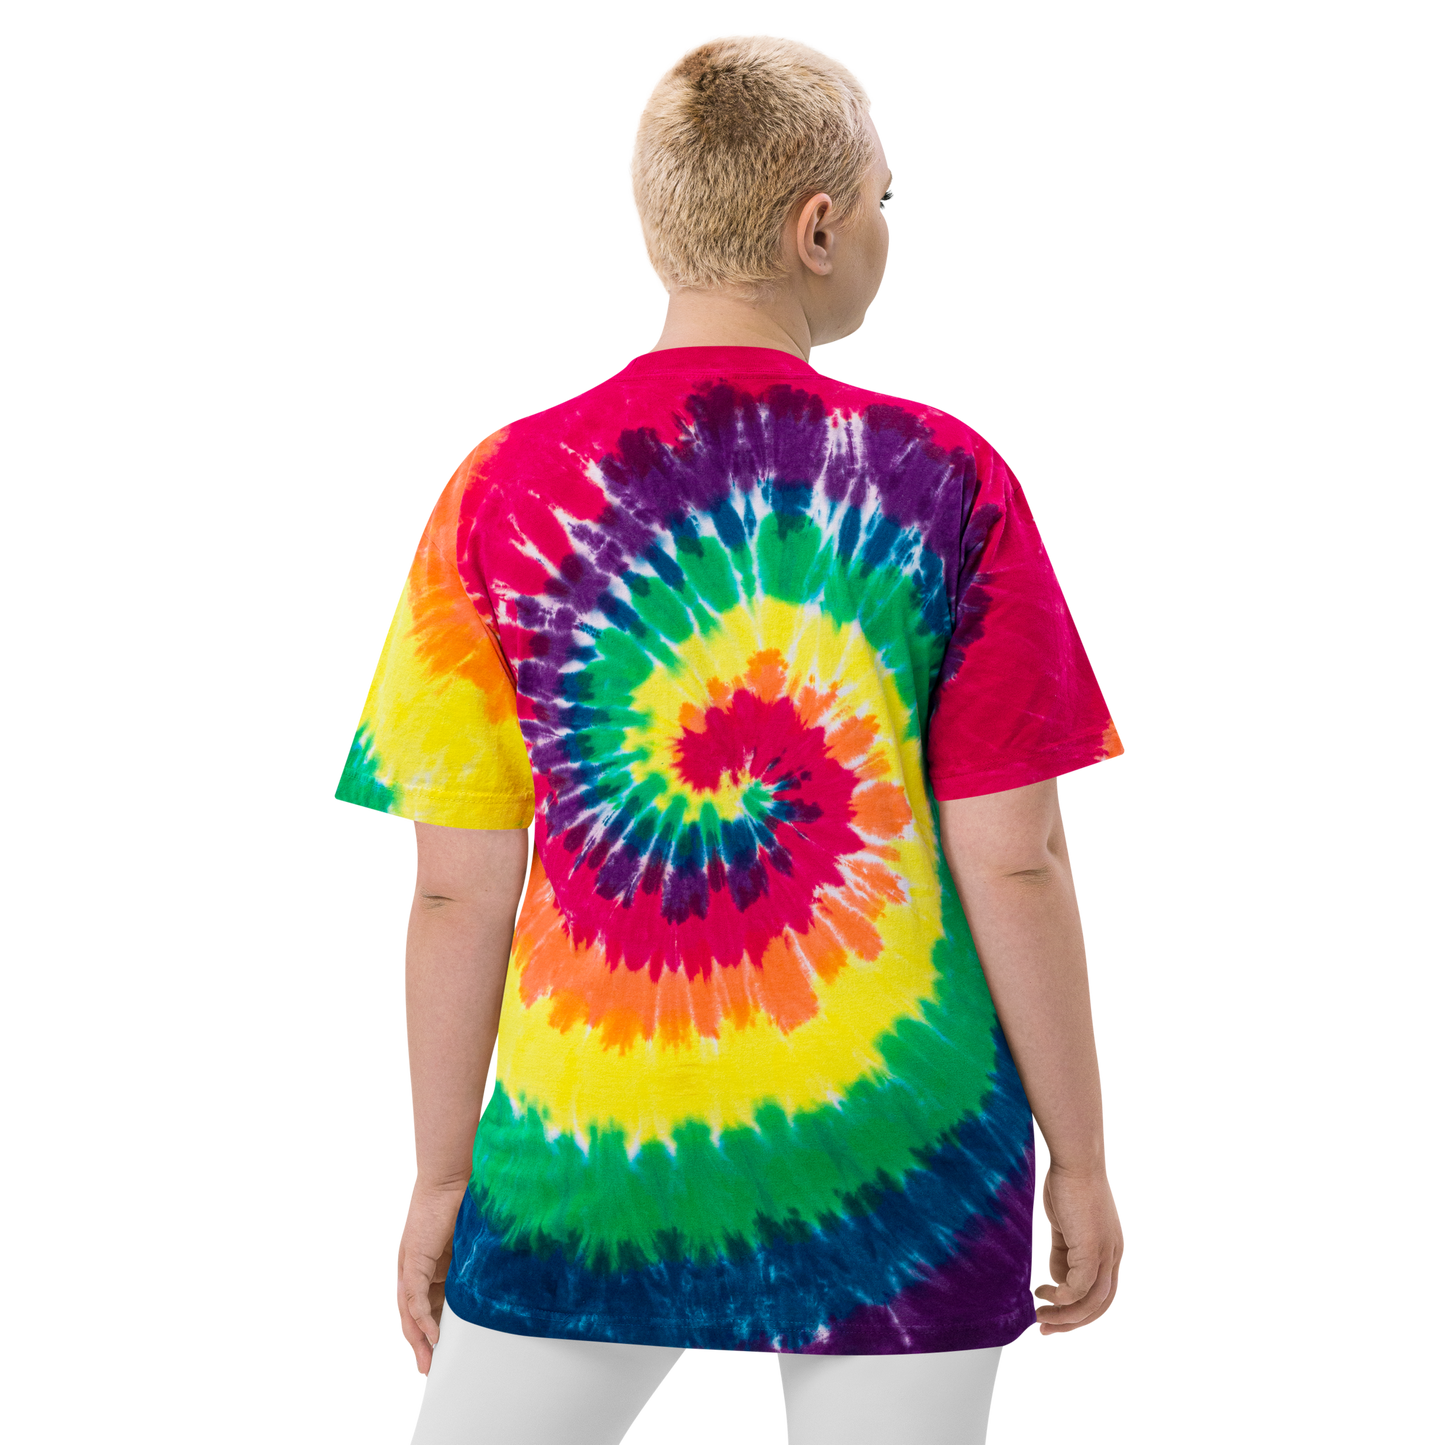 YHM Designs - YQG Windsor Oversized Tie-Dye T-Shirt - Crossed-X Design with Airport Code and Vintage Propliner - White Embroidery - Image 14